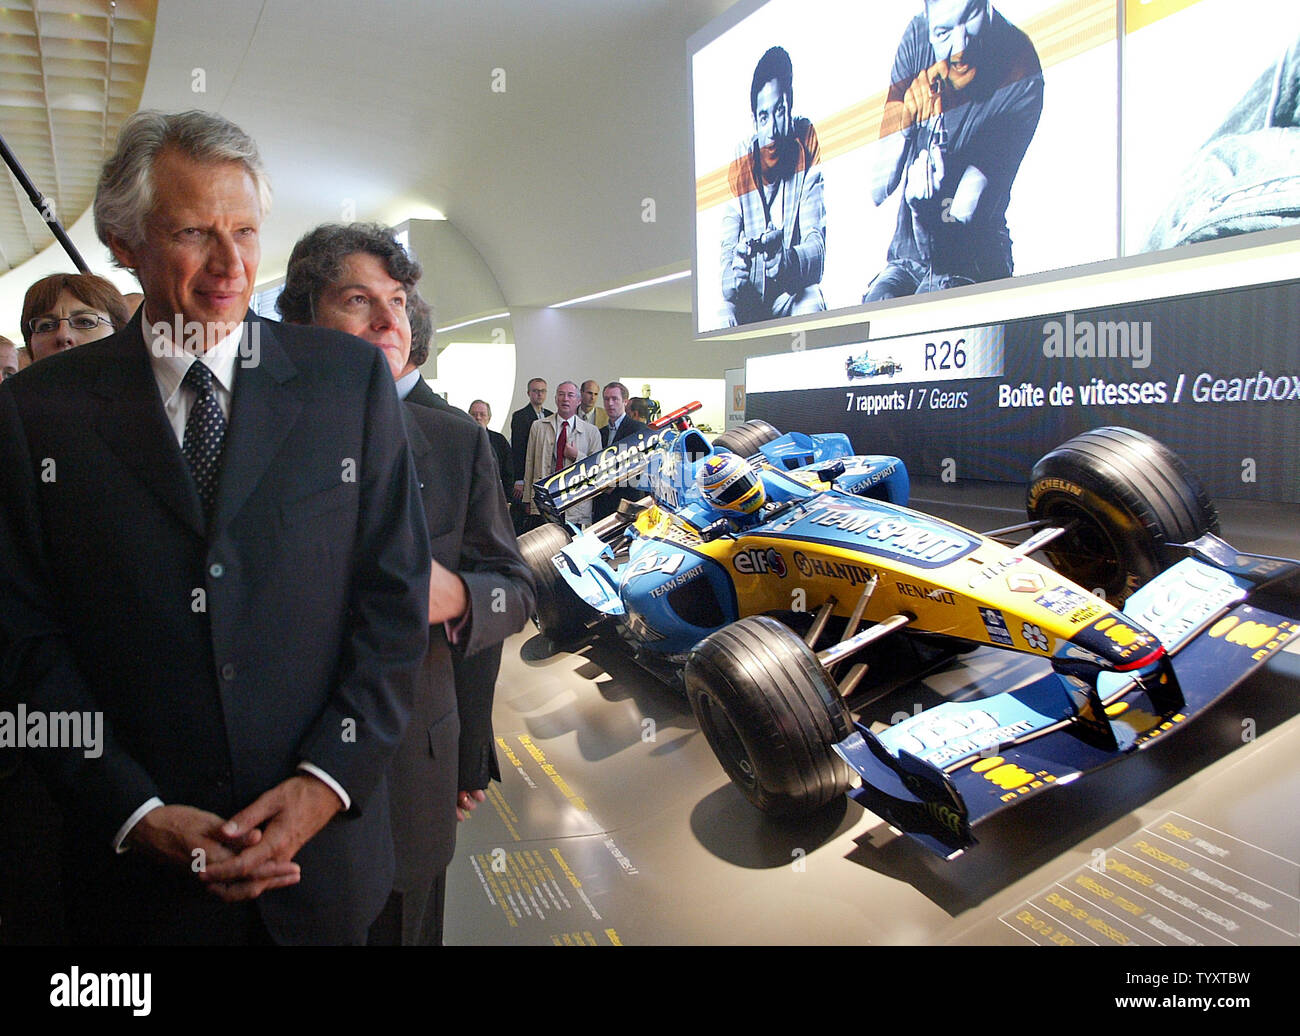 French Prime Minister Dominique de Villepin walks past the Renault F1 Team R26 sports car as he tours the Paris International Auto Show, Friday, September 29, 2006. The show is to open its doors to the public September 30. (UPI Photo/Eco Clement) Stock Photo